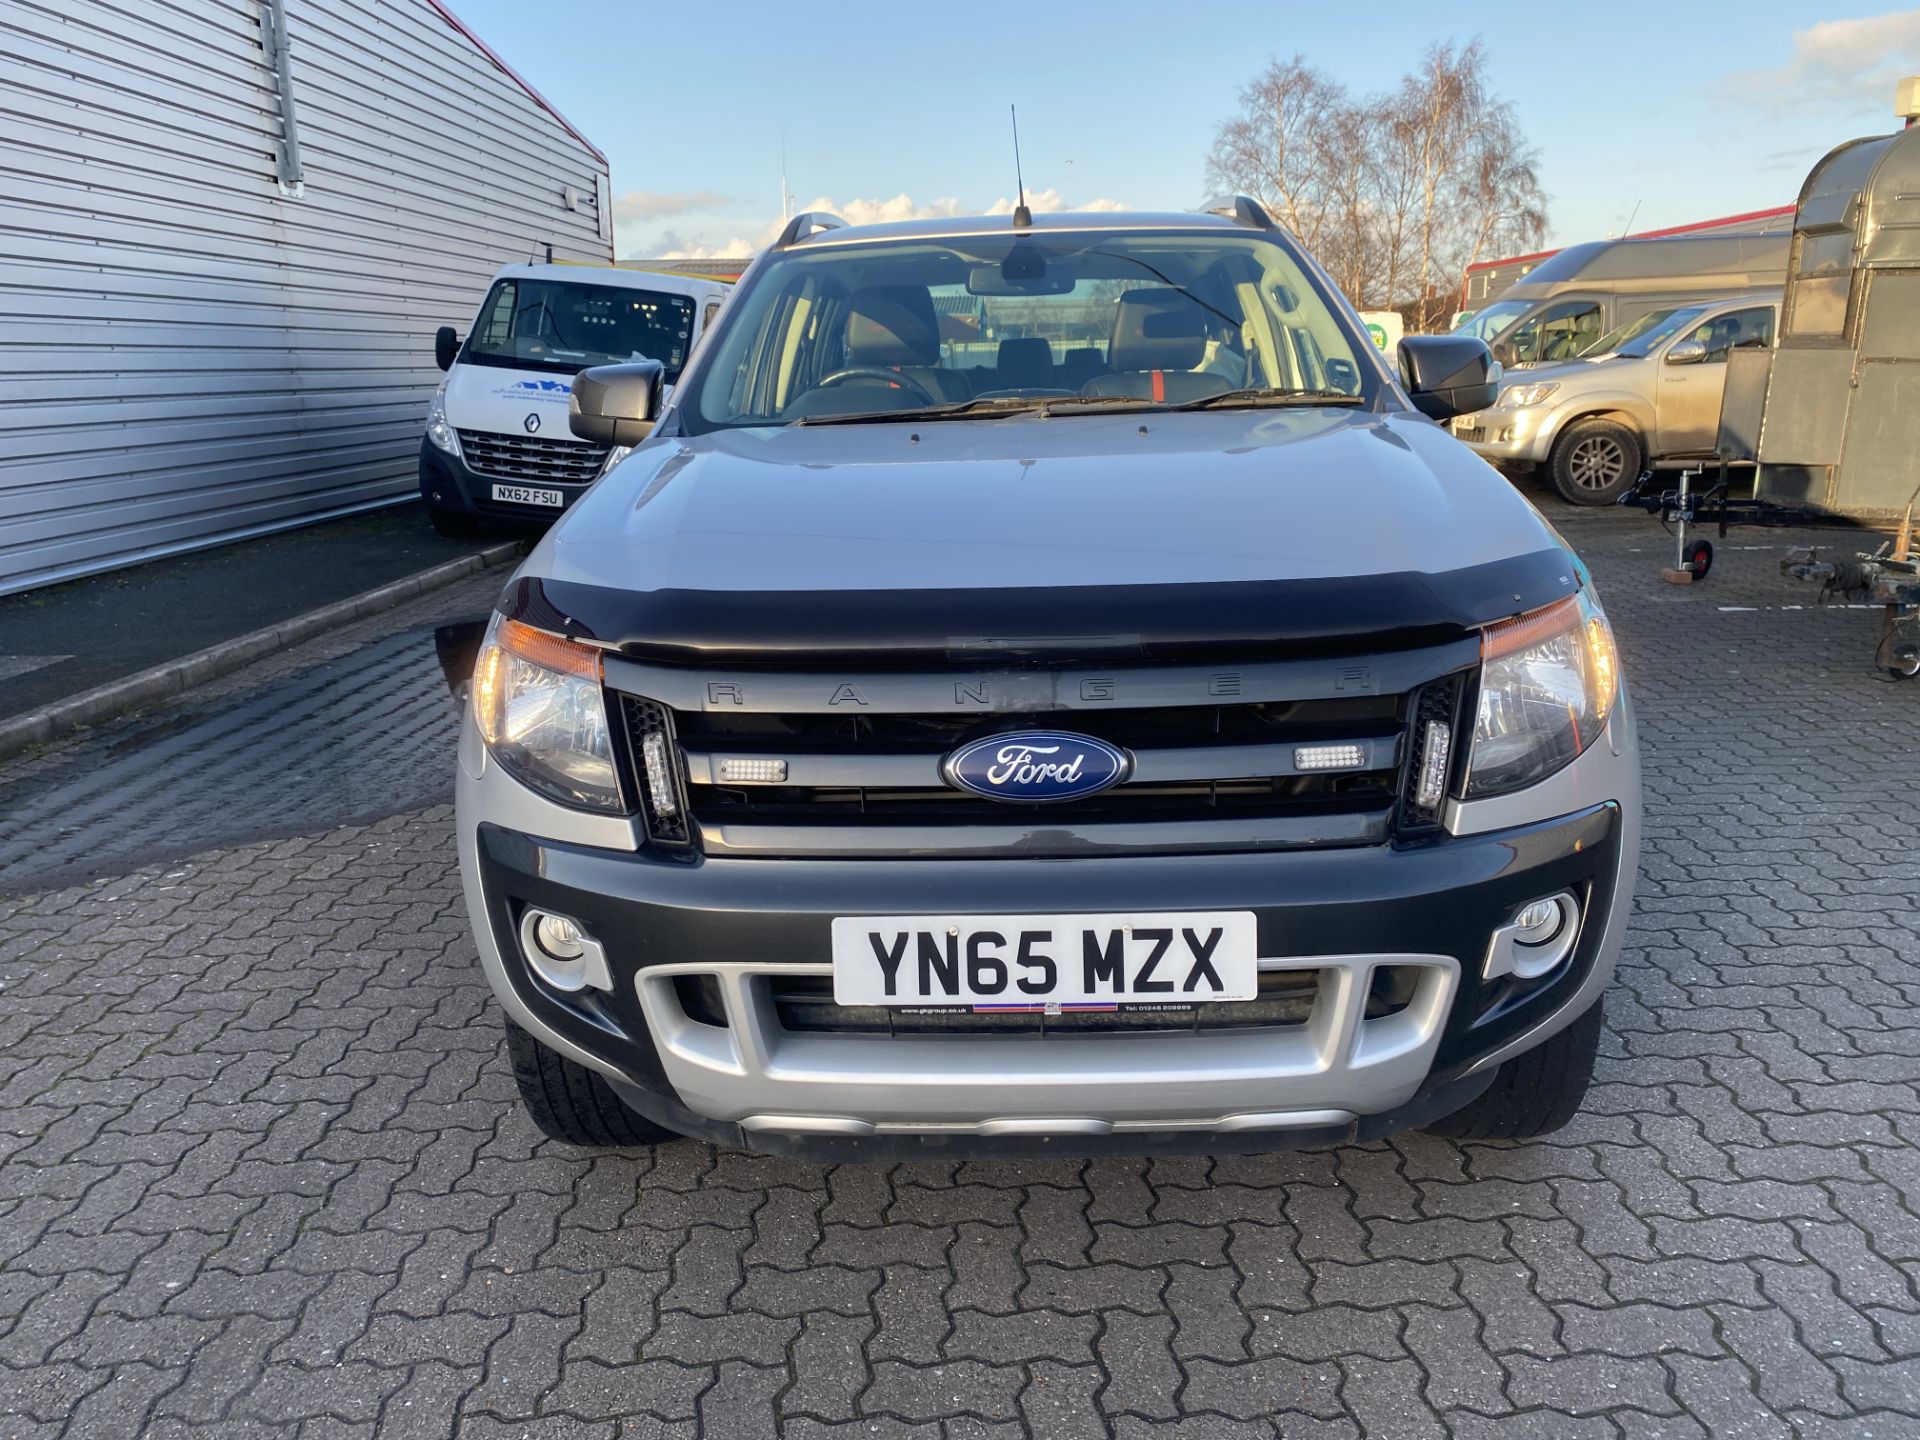 Ford Ranger Wildtrak 4 x 4 3.2 TDCI 6 Speed Automatic Double Cab Pick Up Truck, Silver - Image 2 of 30